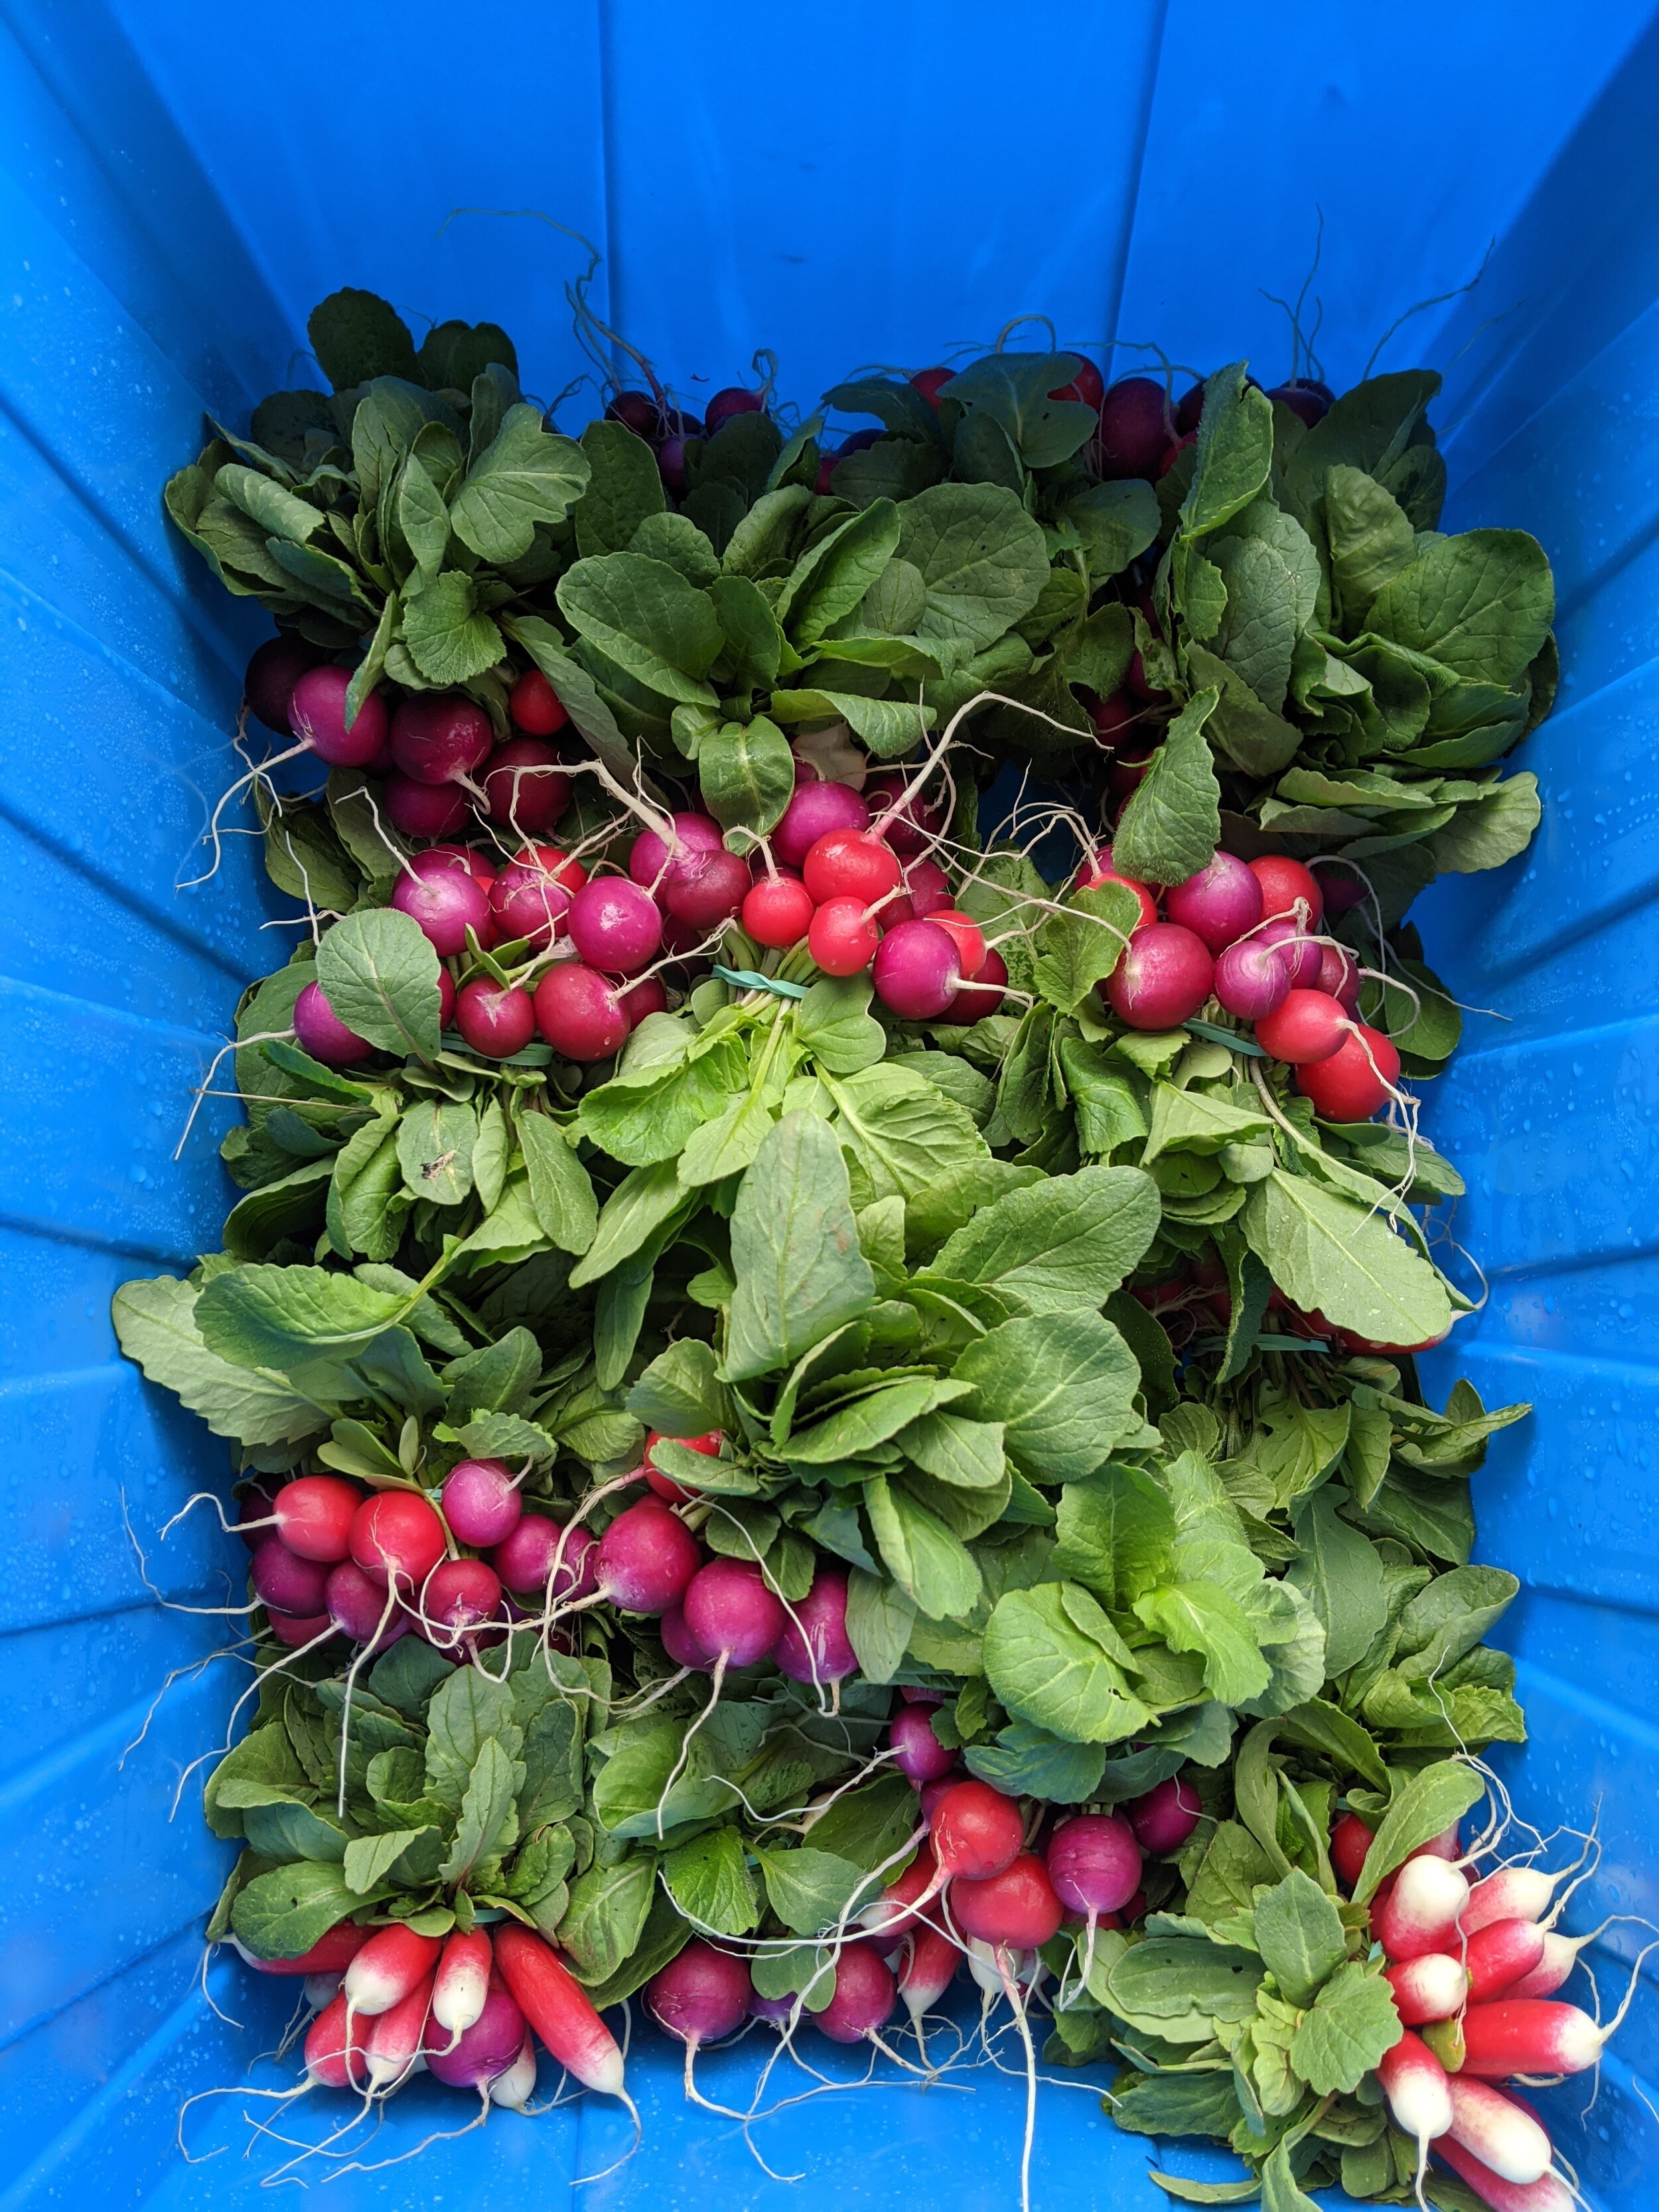  Radishes grown at the Biocultural Conservation Farm. 100% of the farm’s produce has been donated to local food banks in light of the COVID-19 situation.  